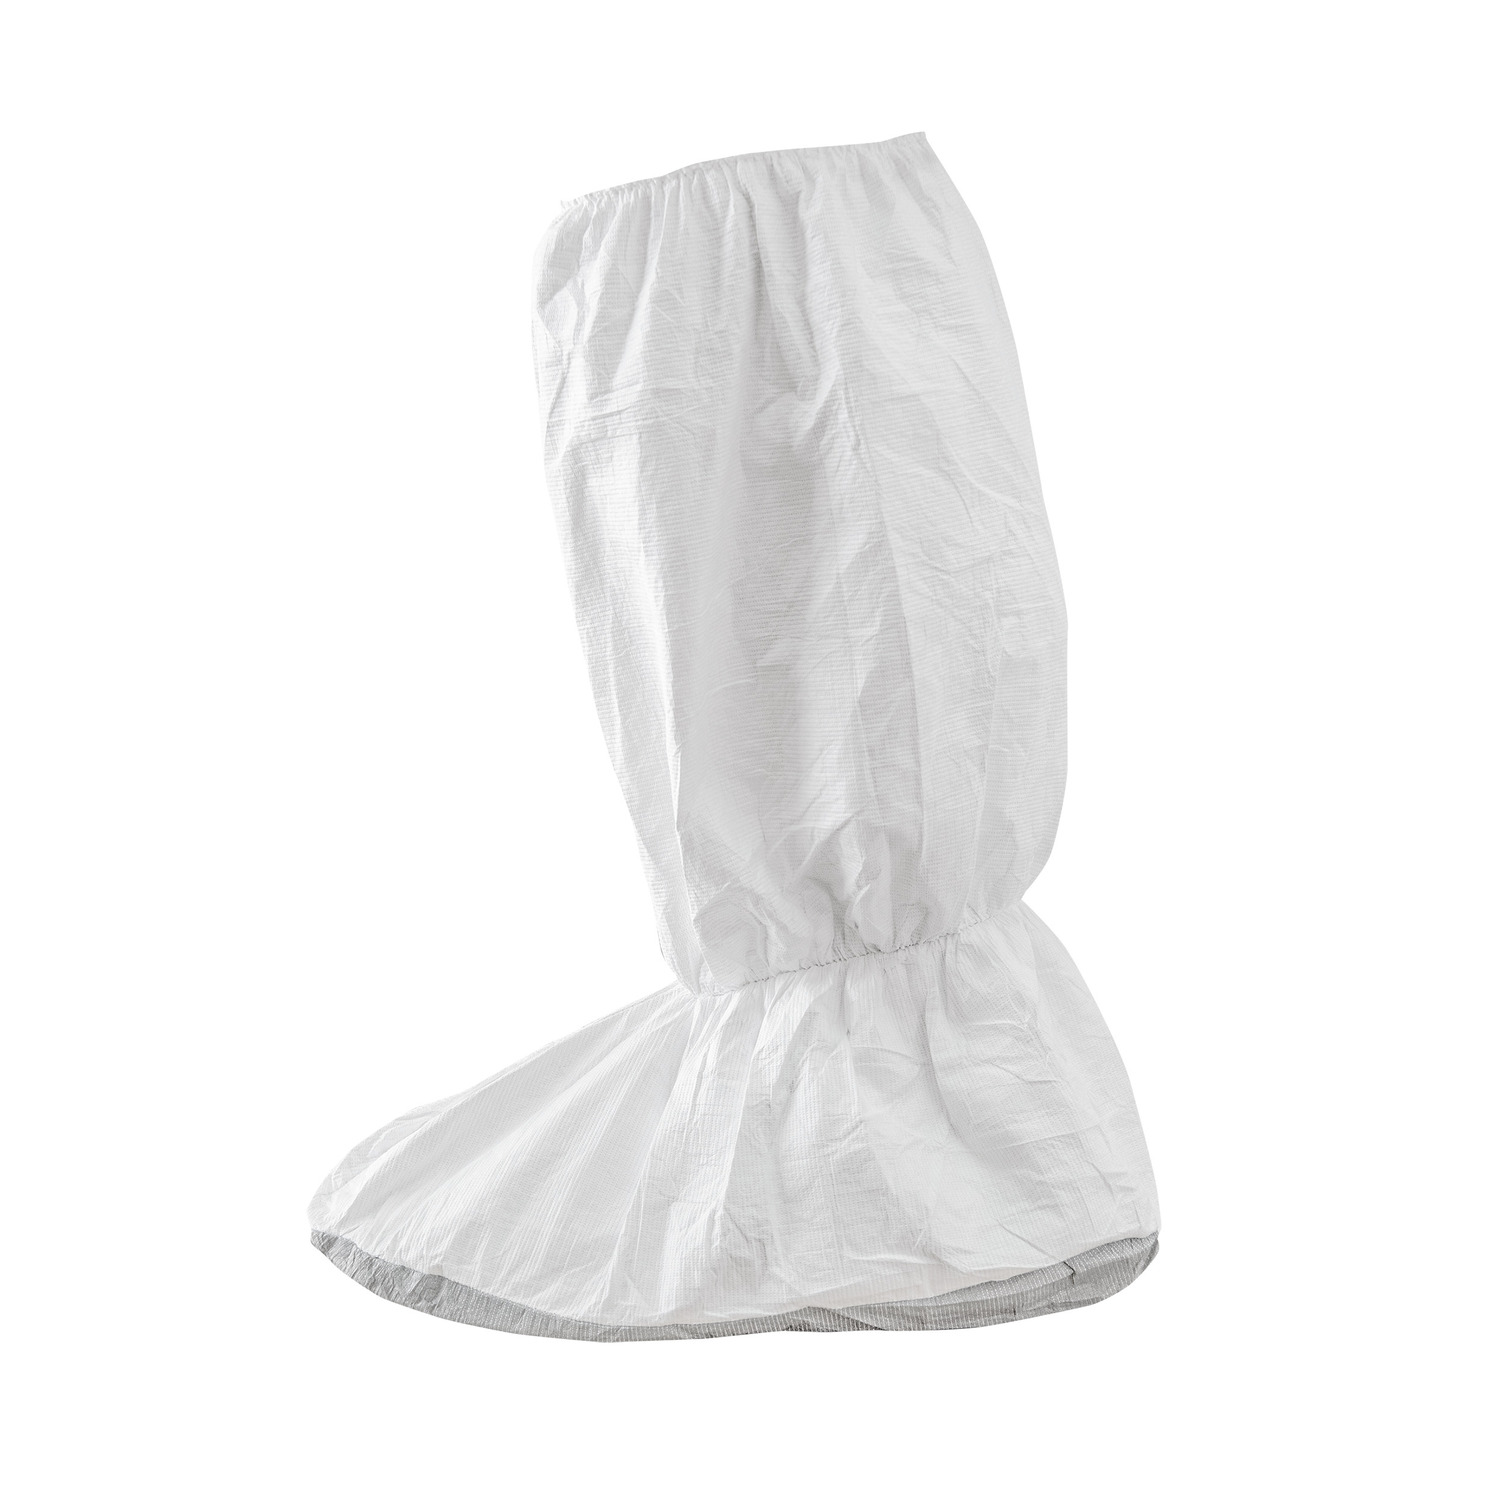 Dupont™ TY454S WHSR Tyvek® 400 Boot Covers w/ FC Sole, 18-in